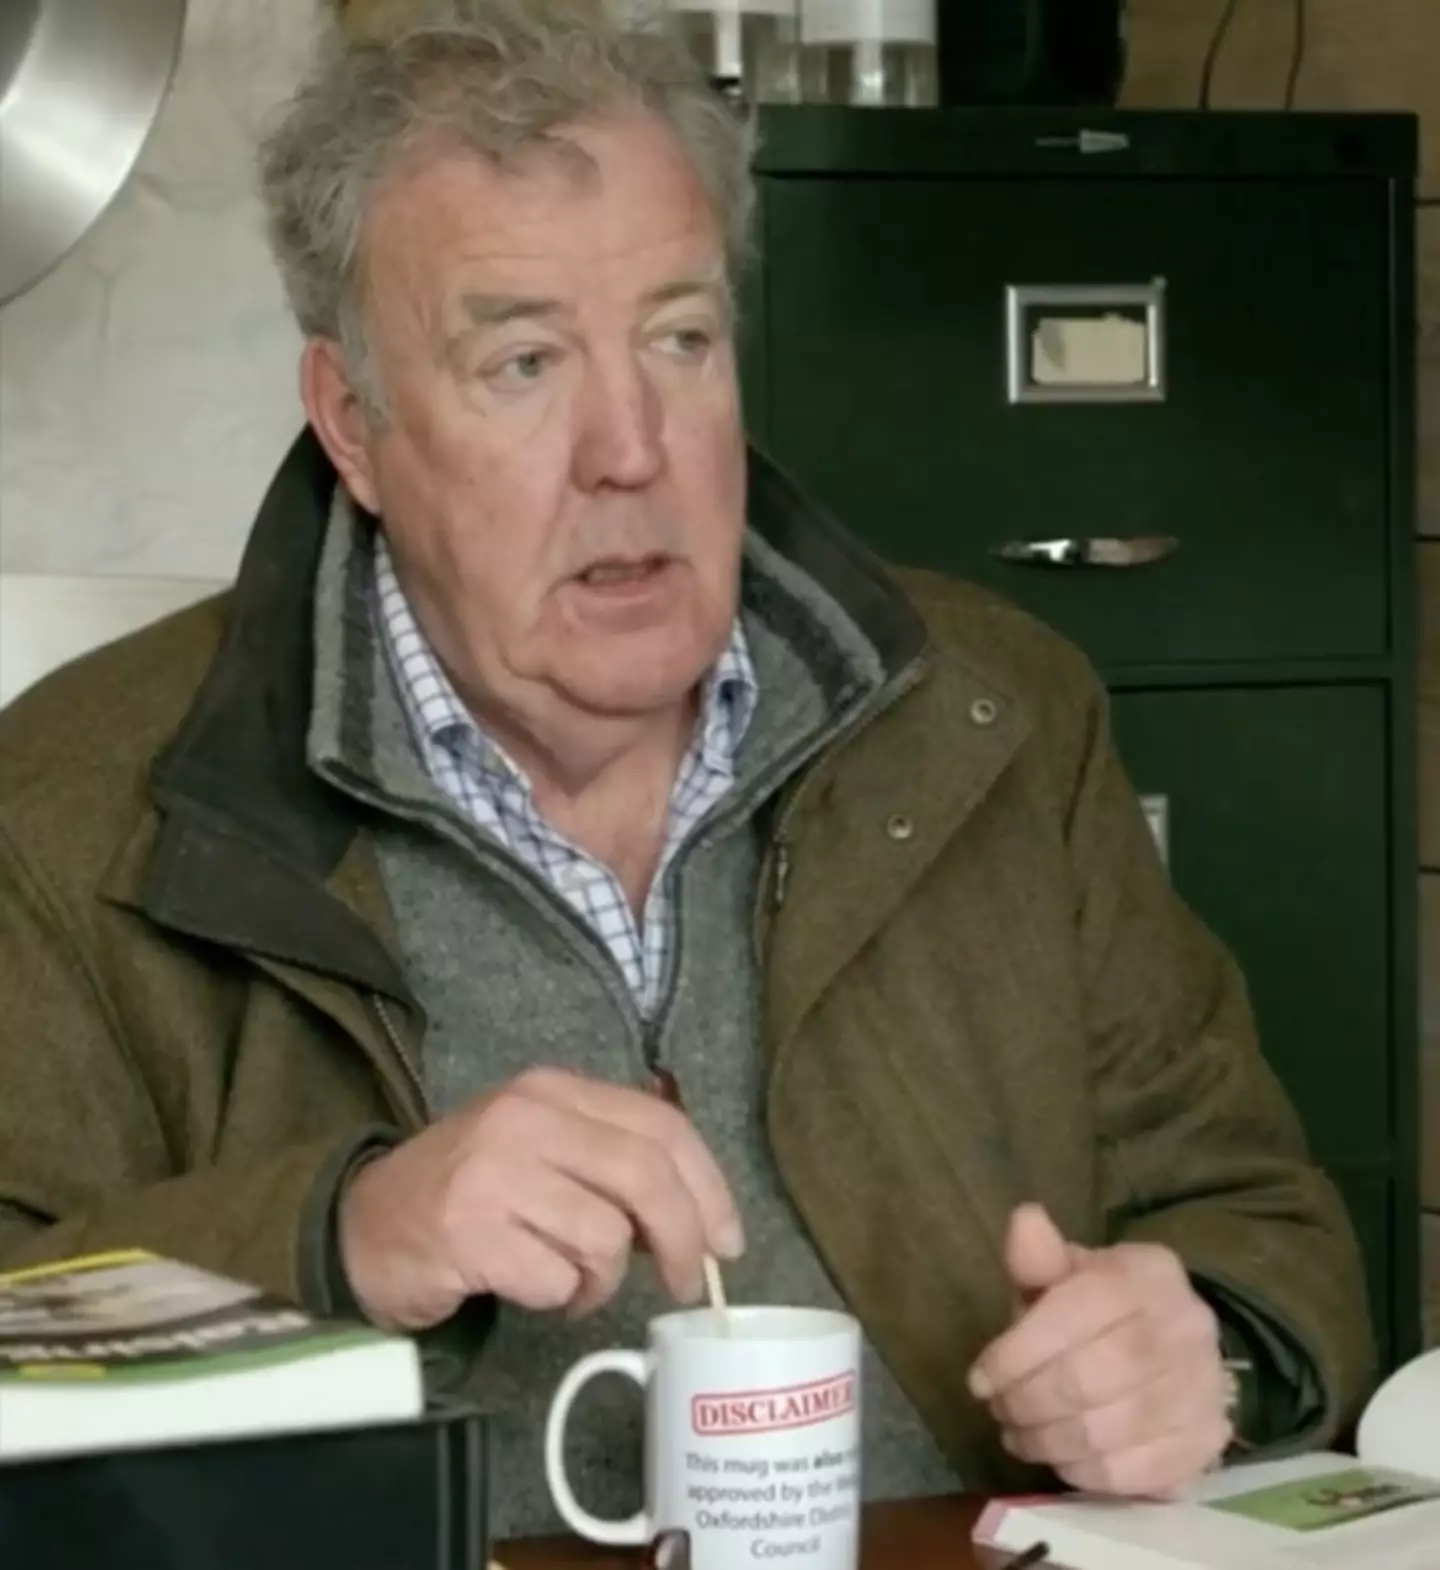 Some viewers have noticed that Clarkson's mug is poking fun at the council. (Prime Video)